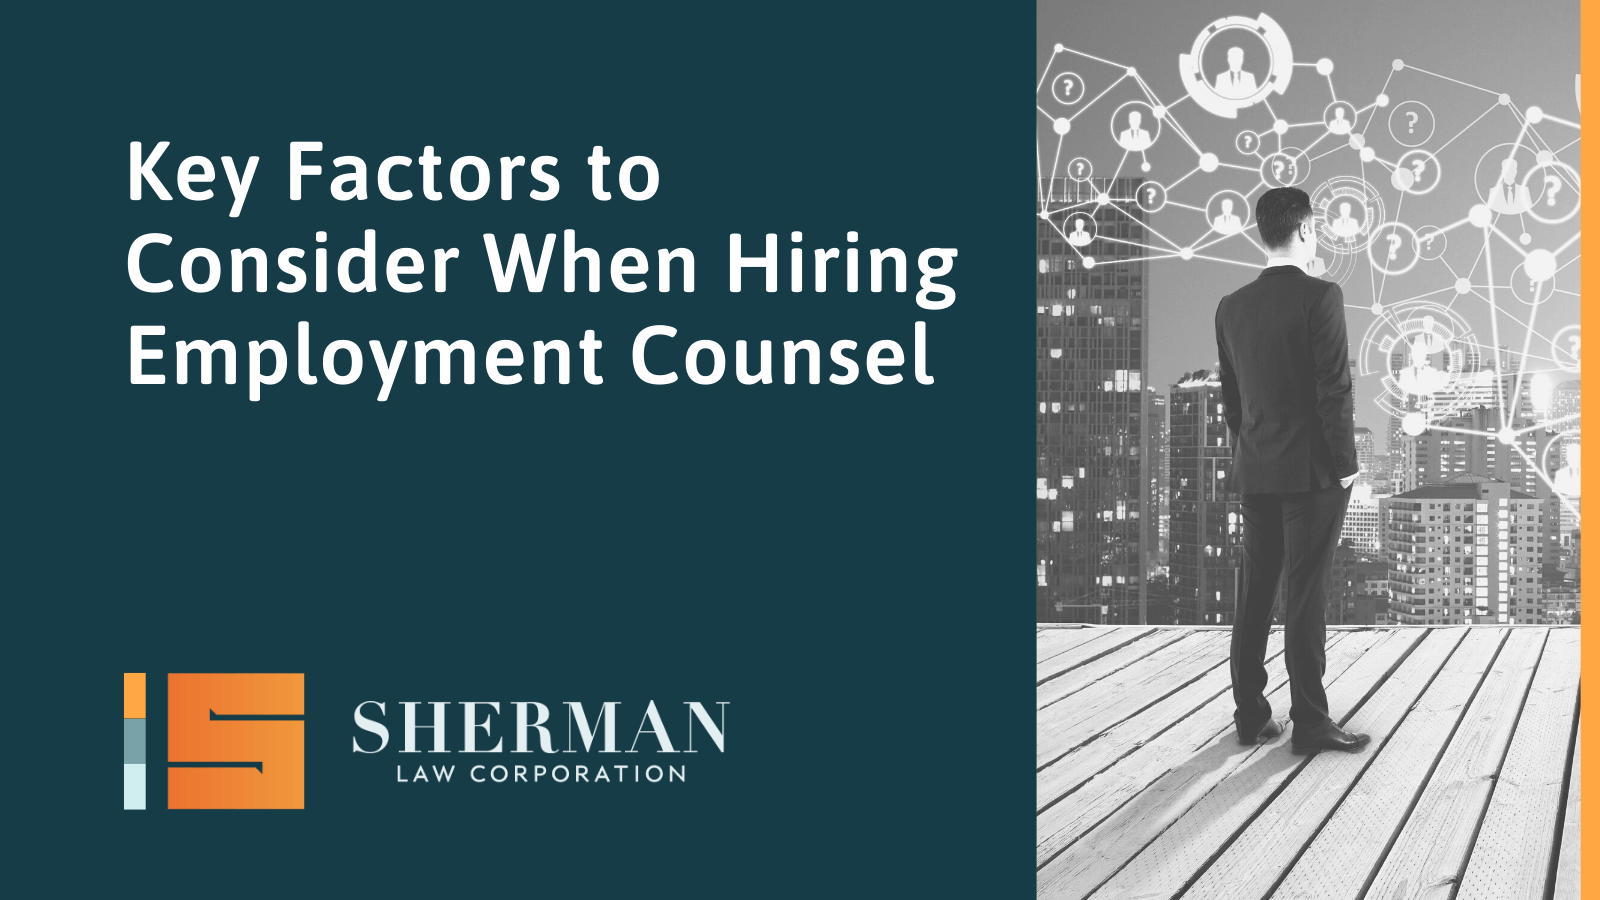 Key Factors to Consider When Hiring Employment Counsel - sherman law corporation